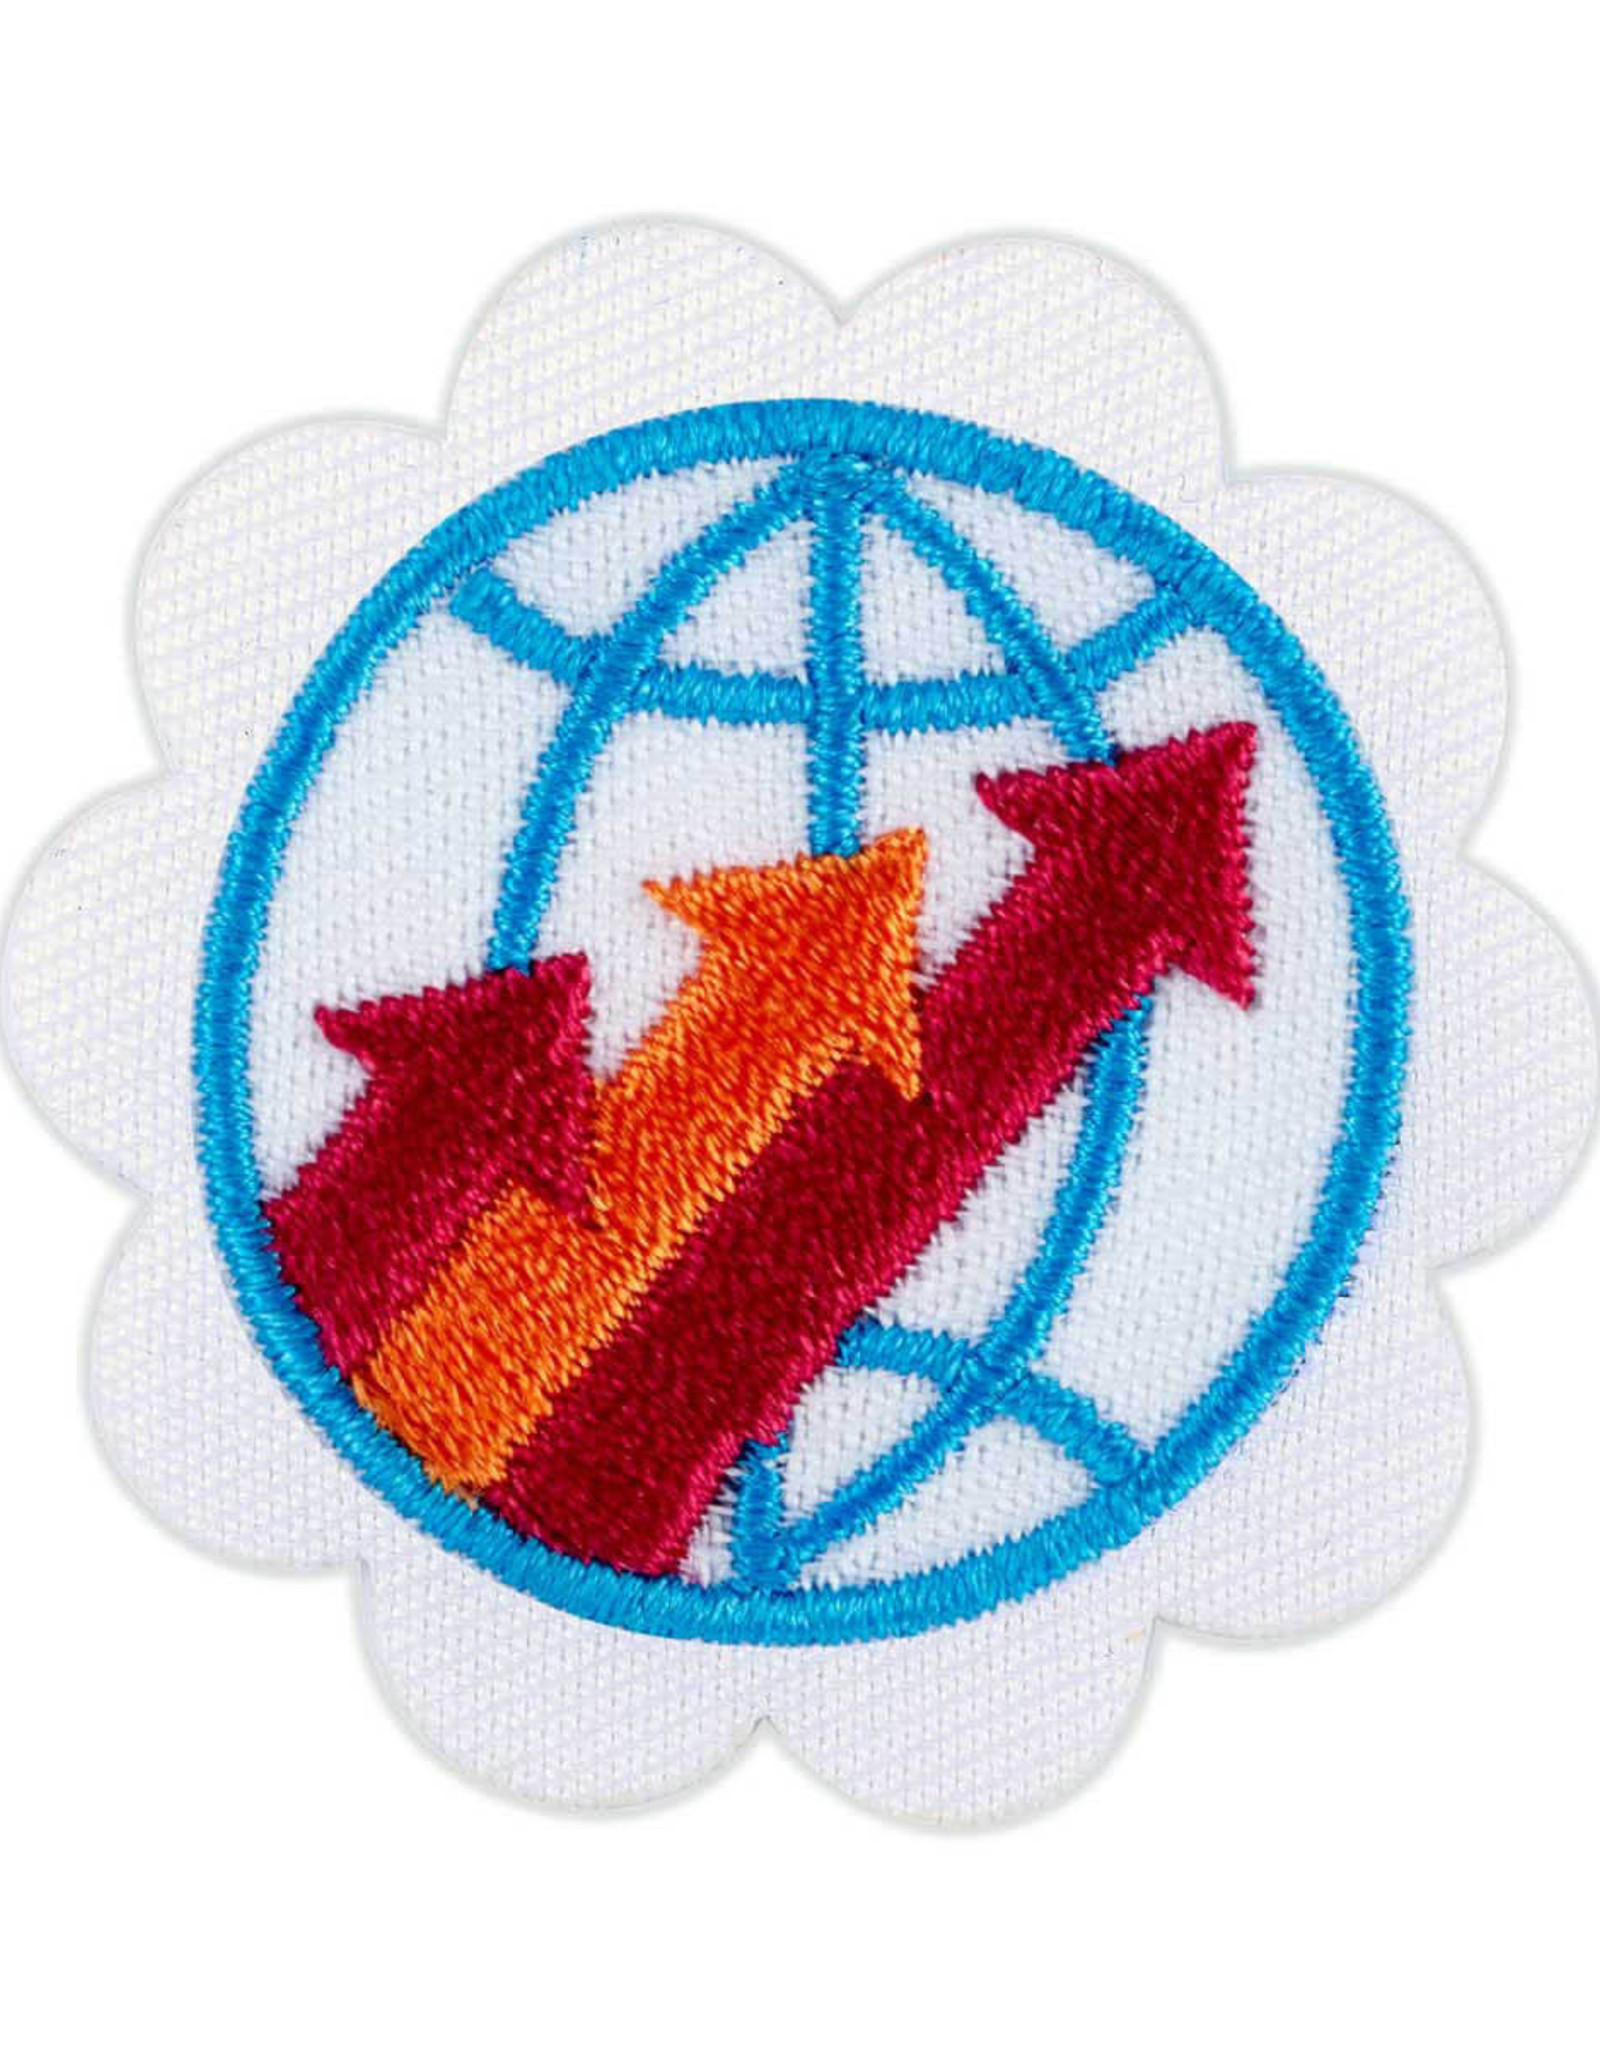 GIRL SCOUTS OF THE USA Daisy  Global Action Award Year 2 Badge